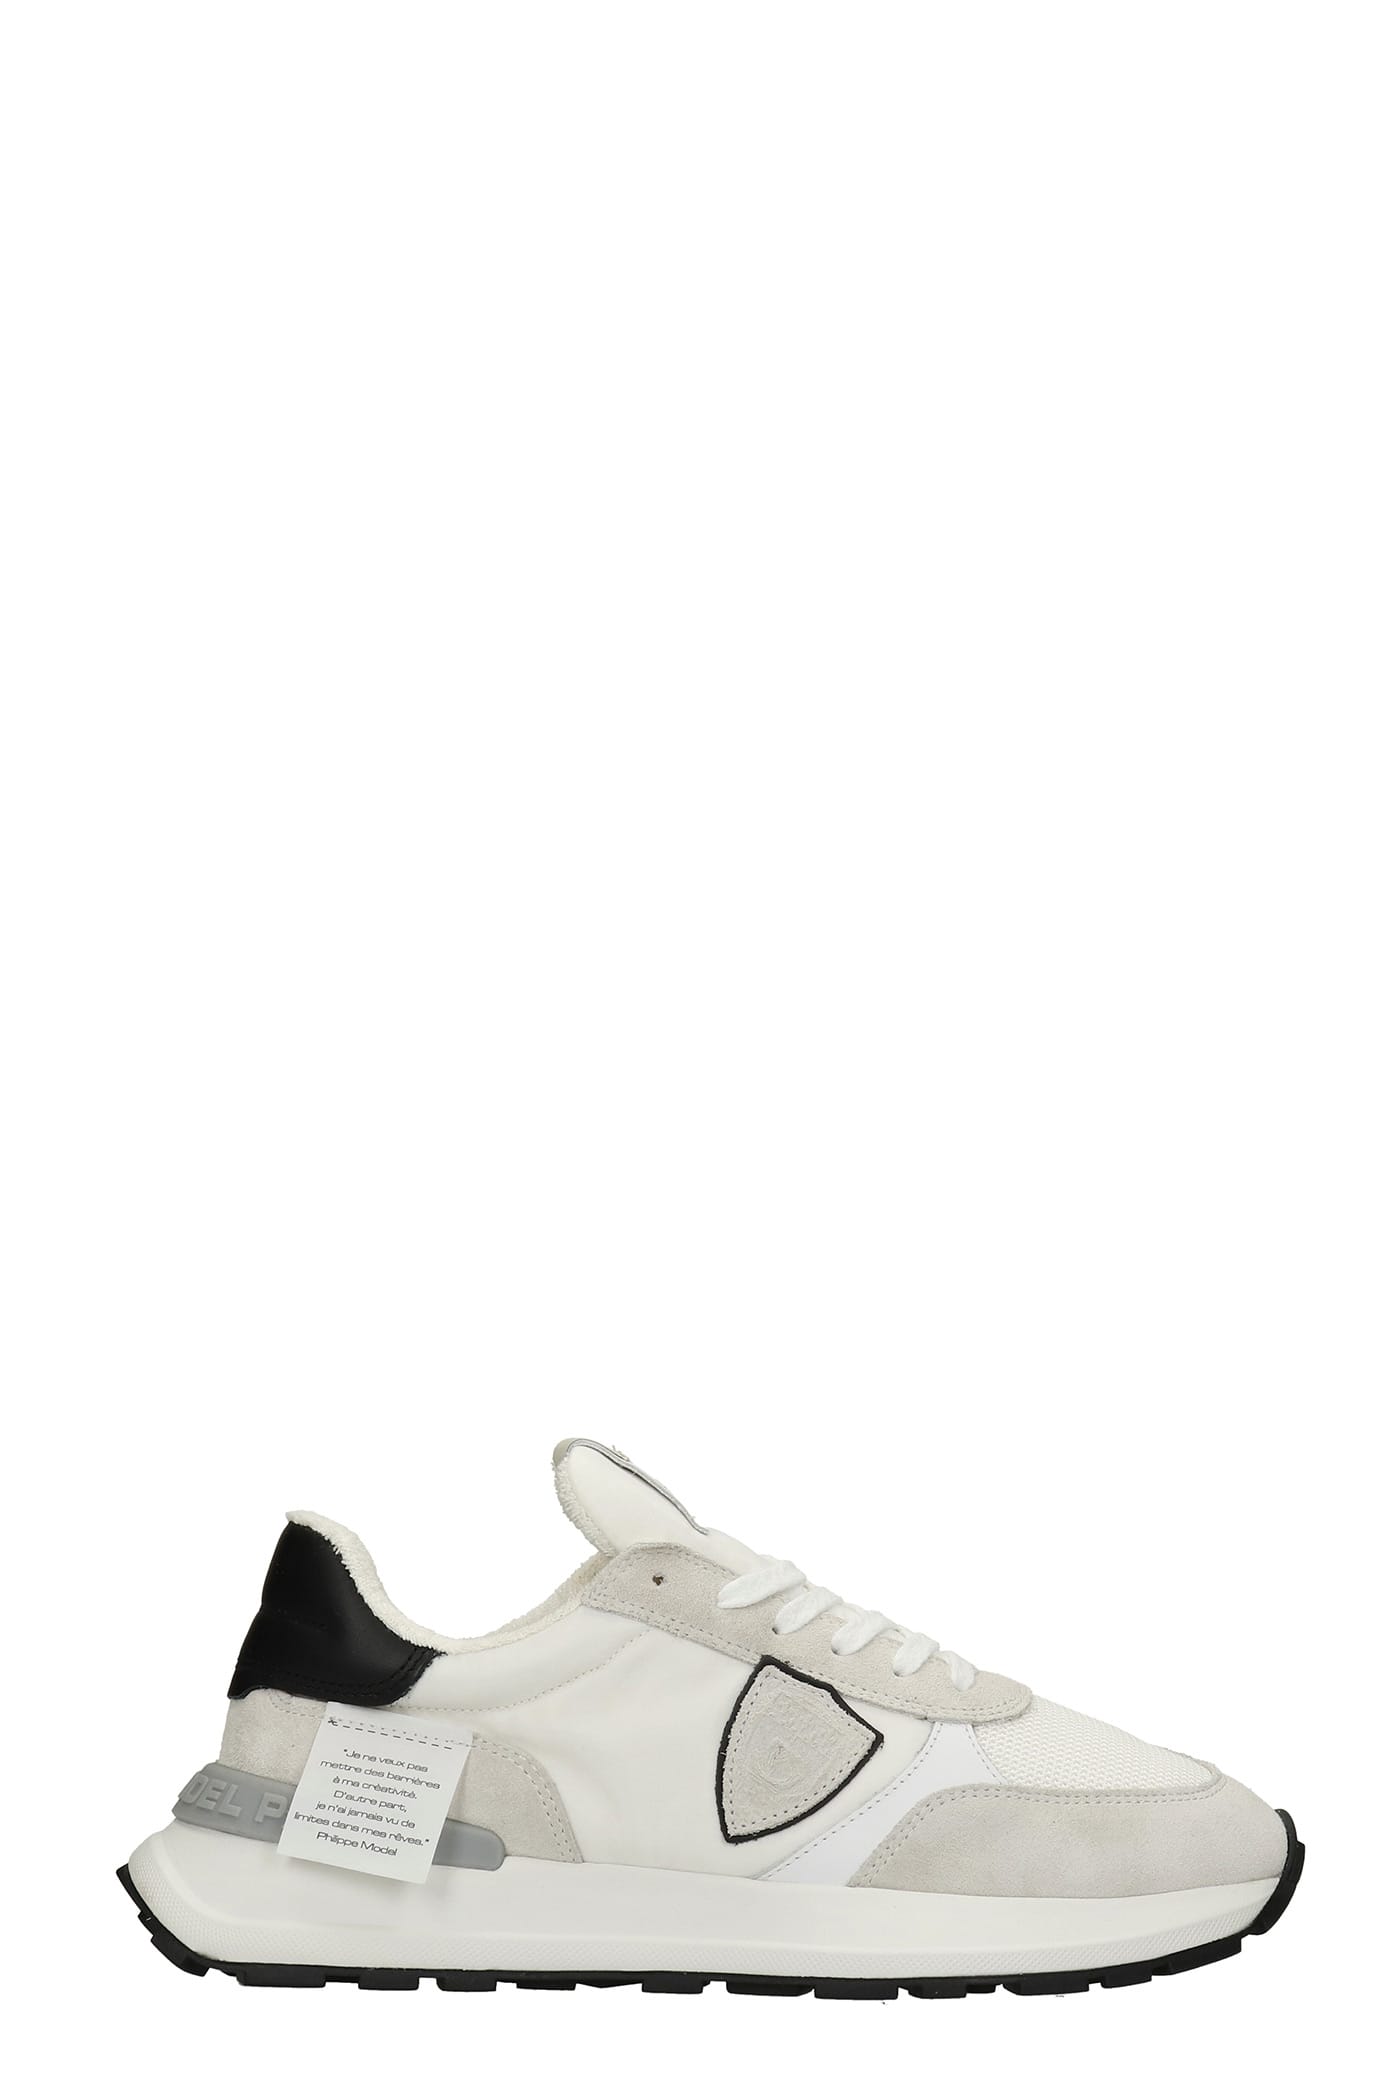 Philippe Model Antibes Sneakers In White Suede And Fabric